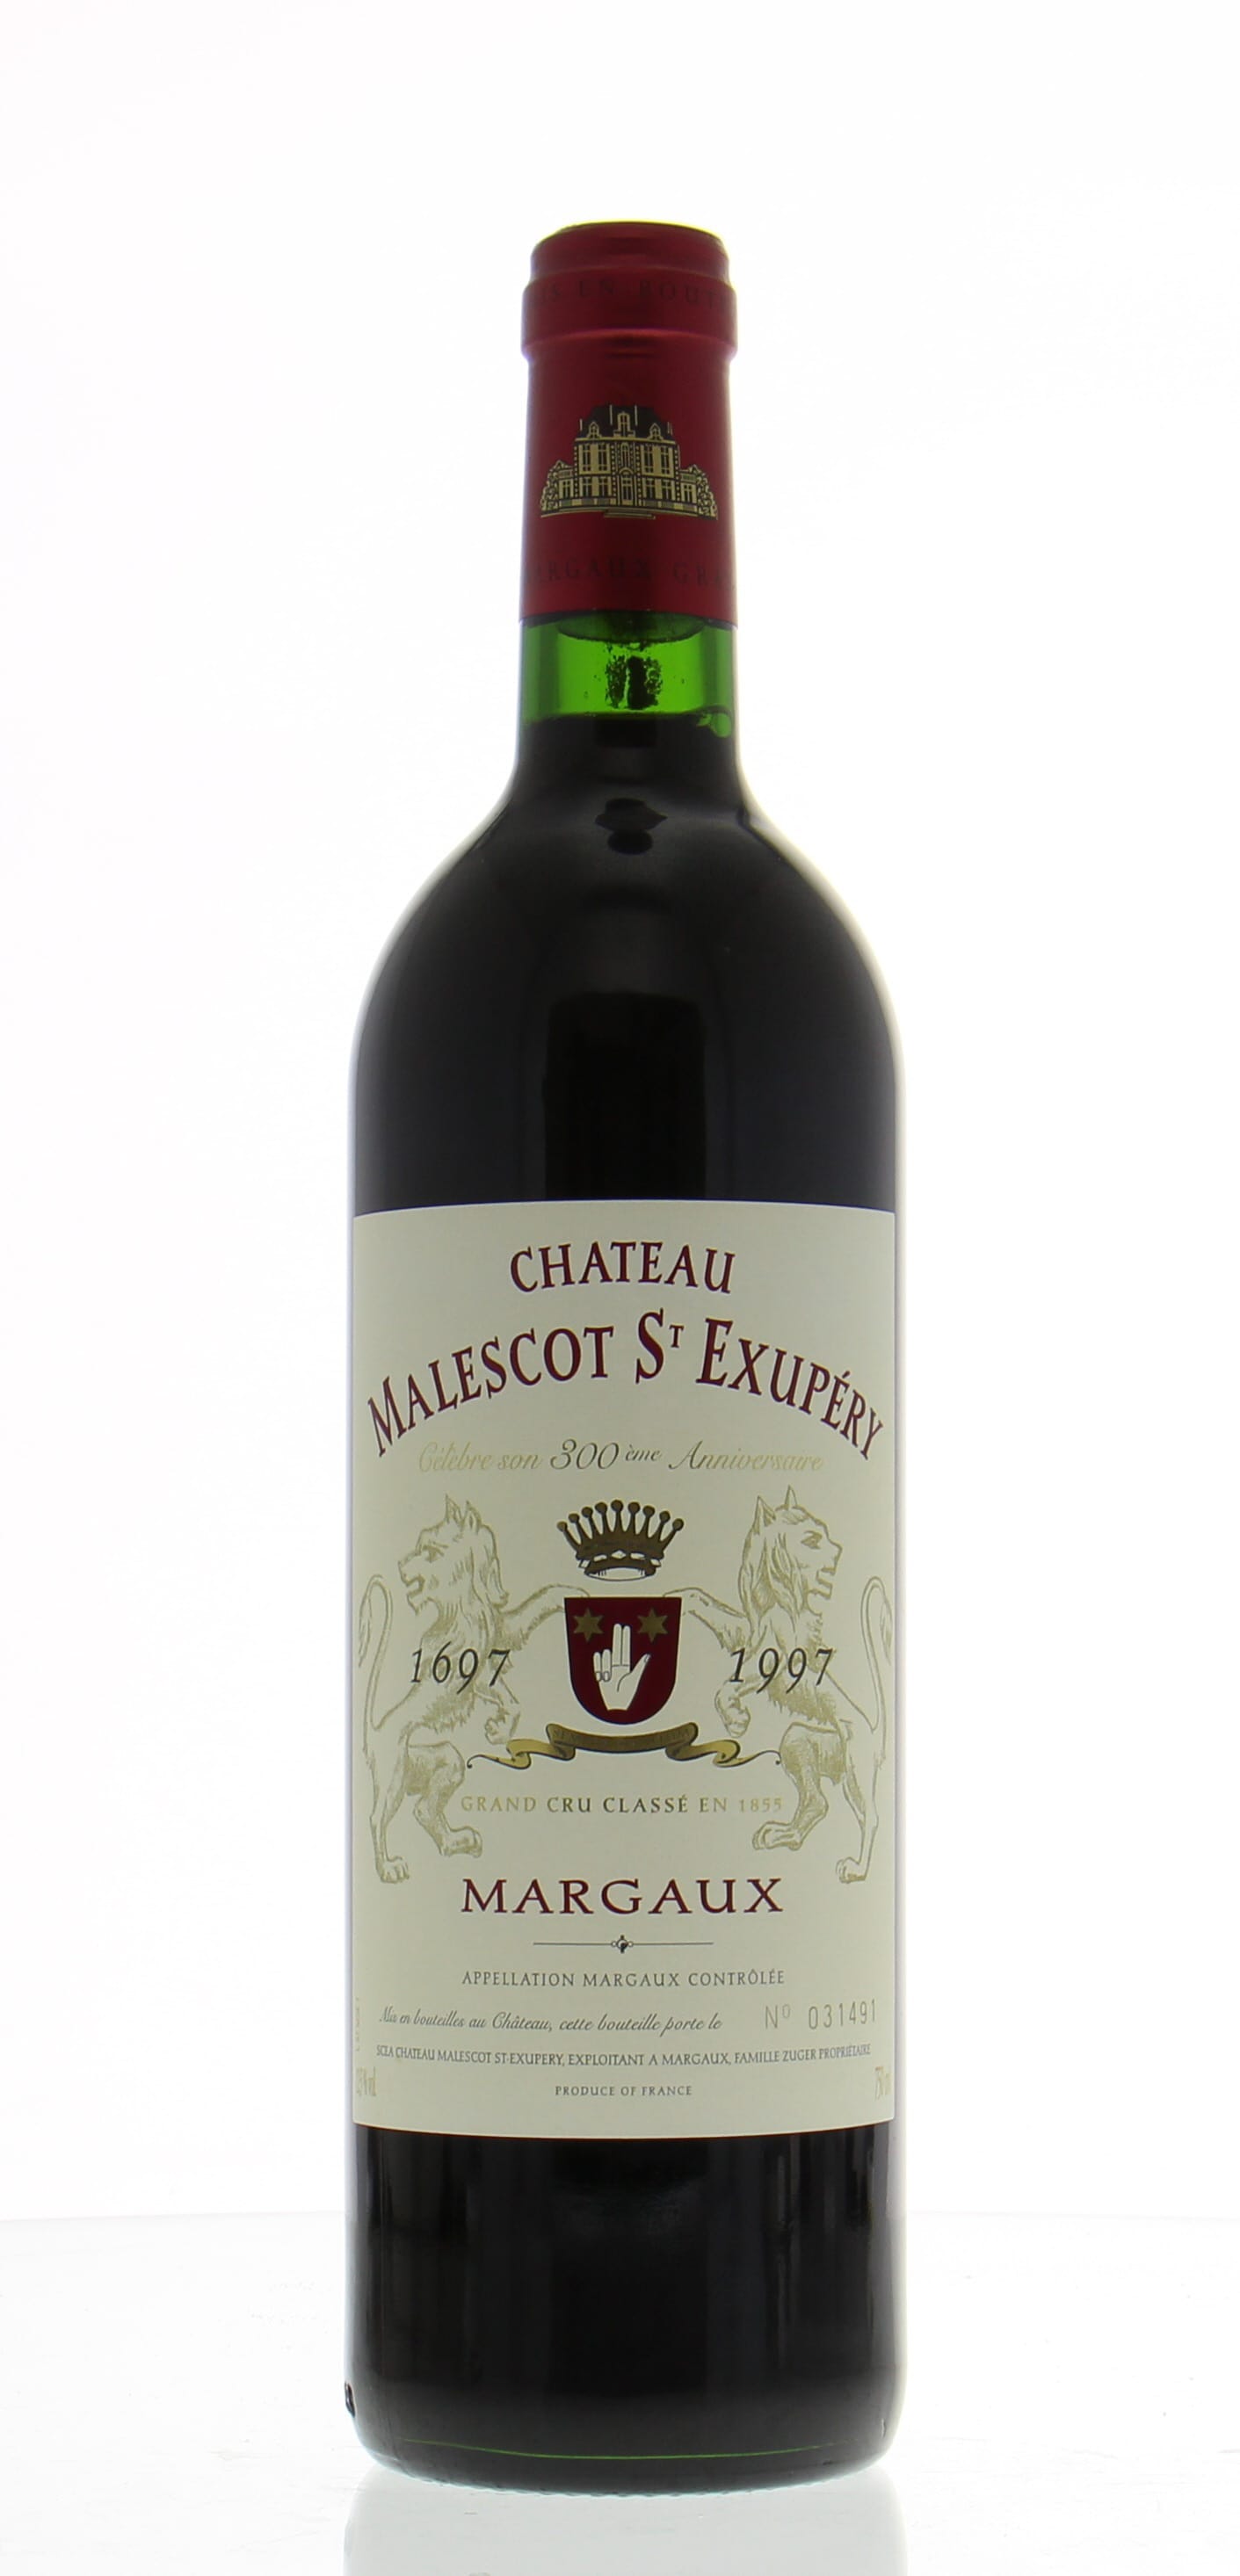 Chateau Malescot-St-Exupery - Chateau Malescot-St-Exupery 1997